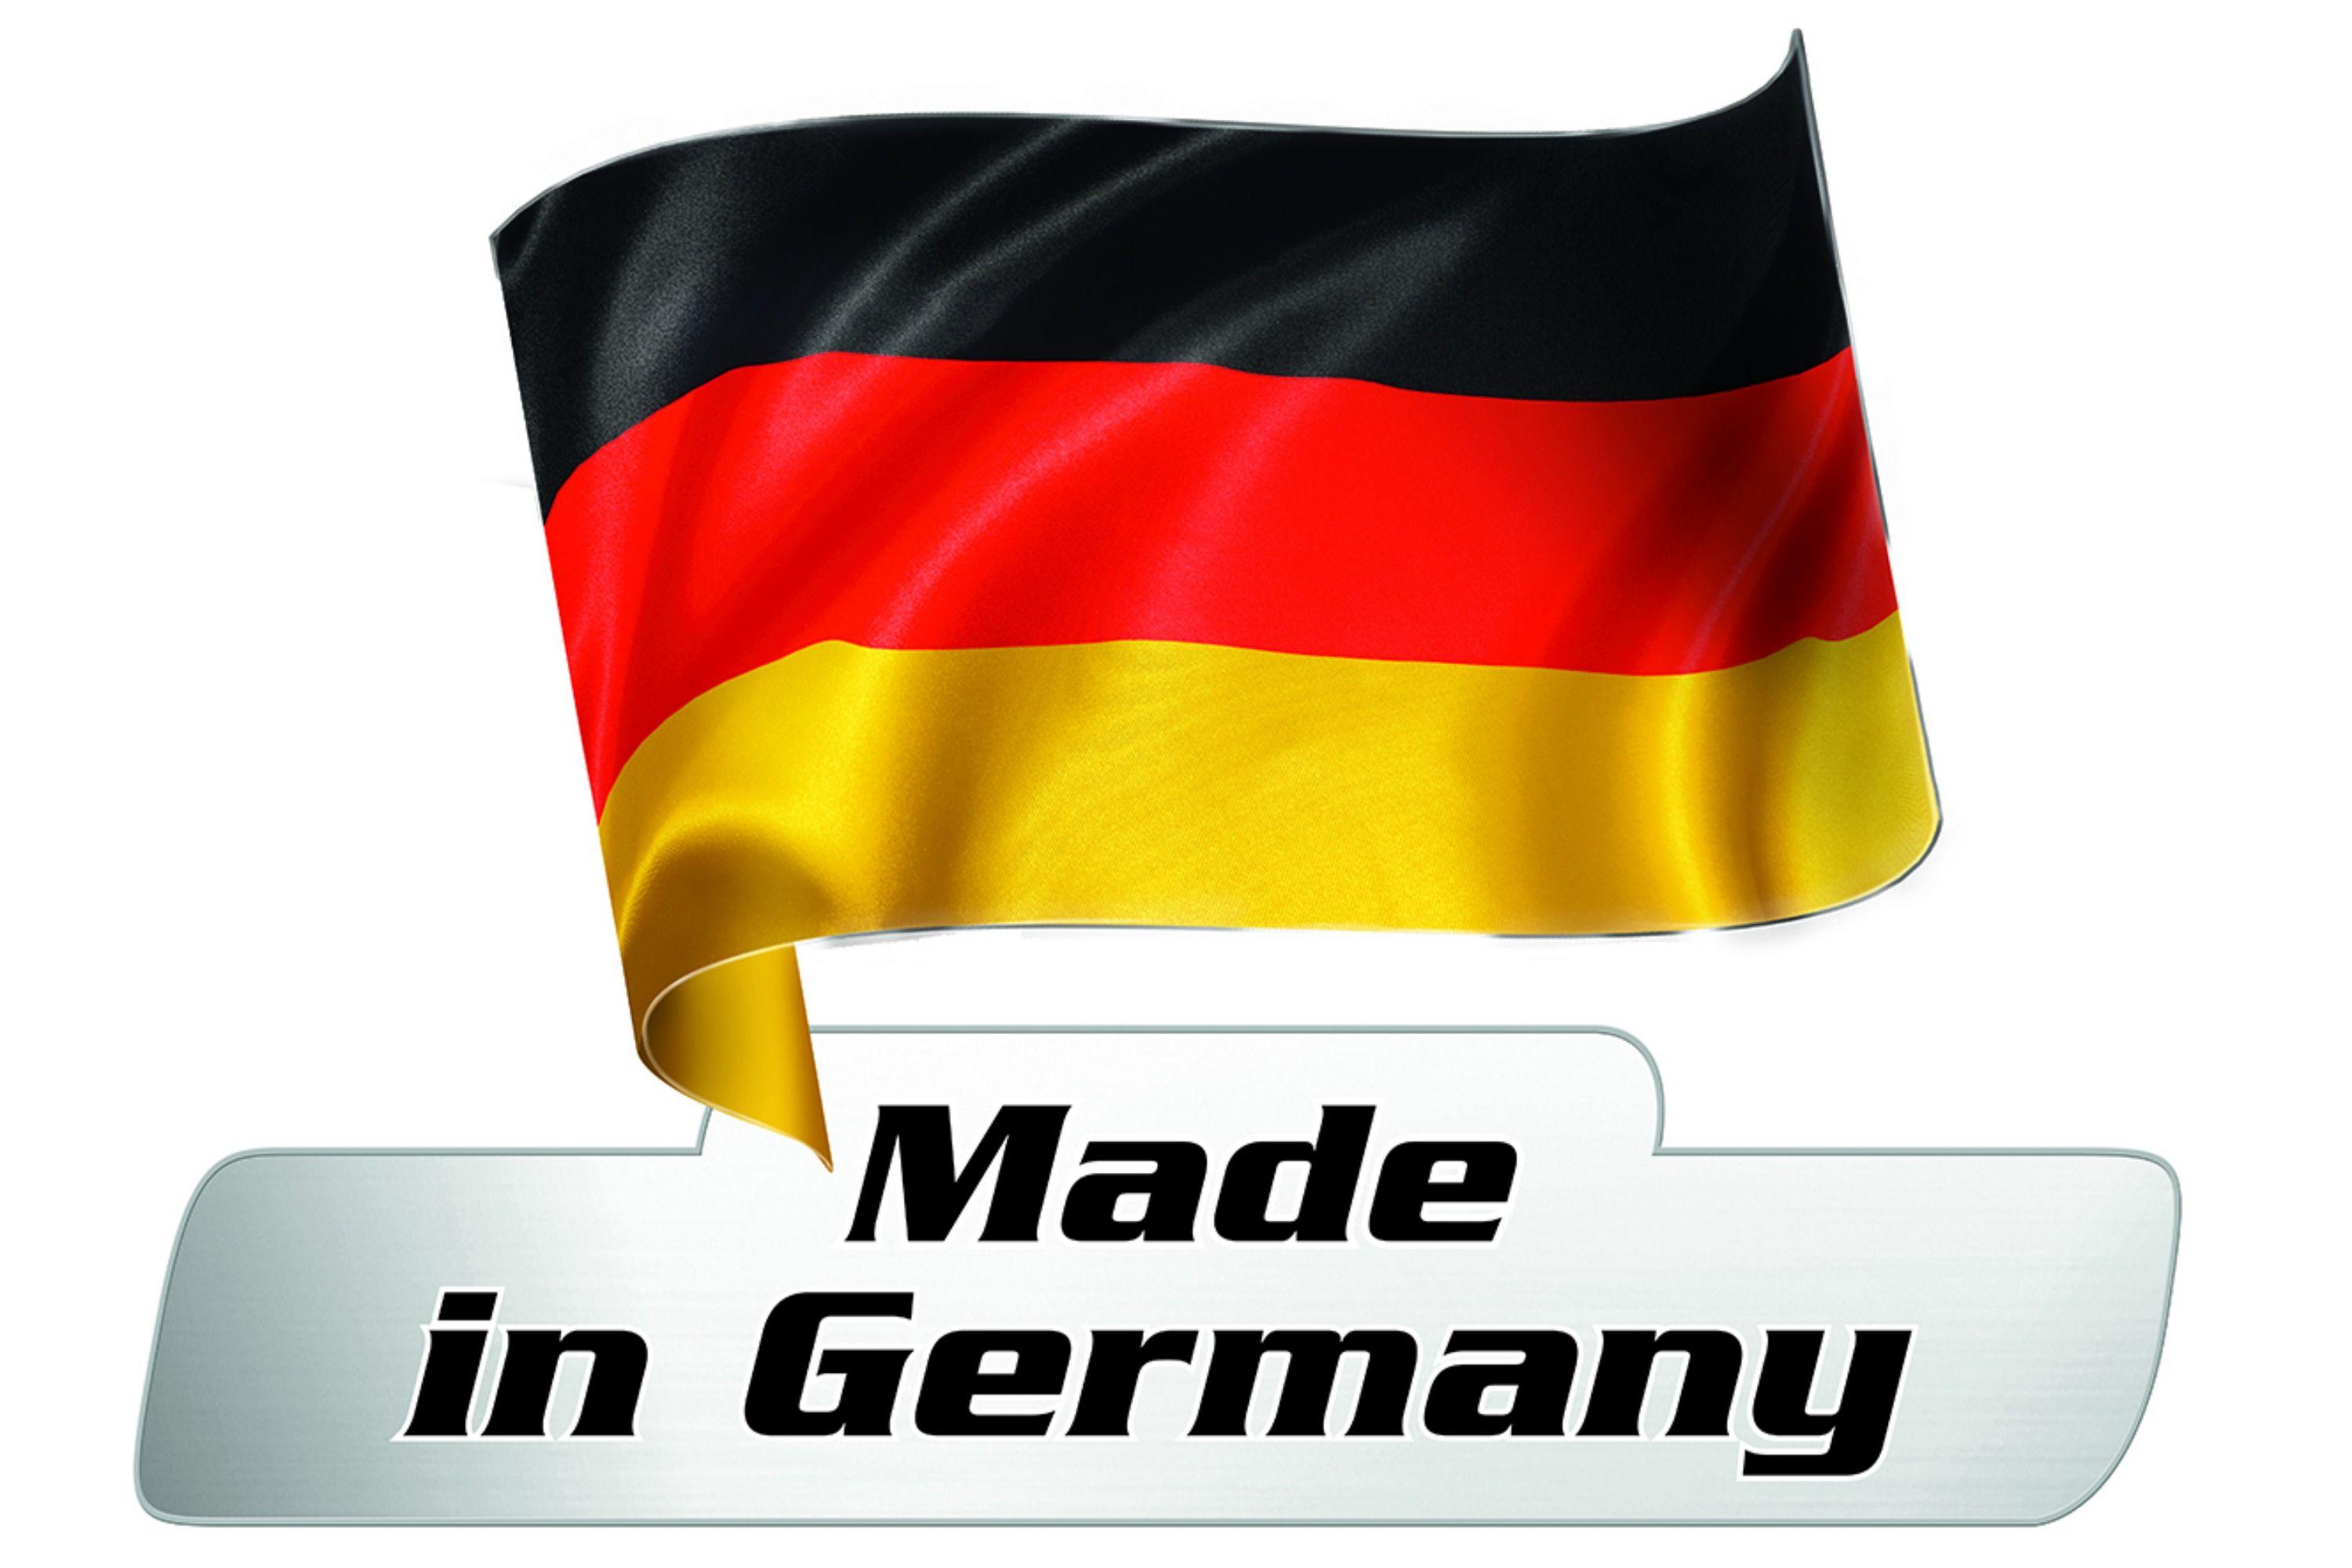 Germany Logo - German lobby group regrets fall of exports to Russia